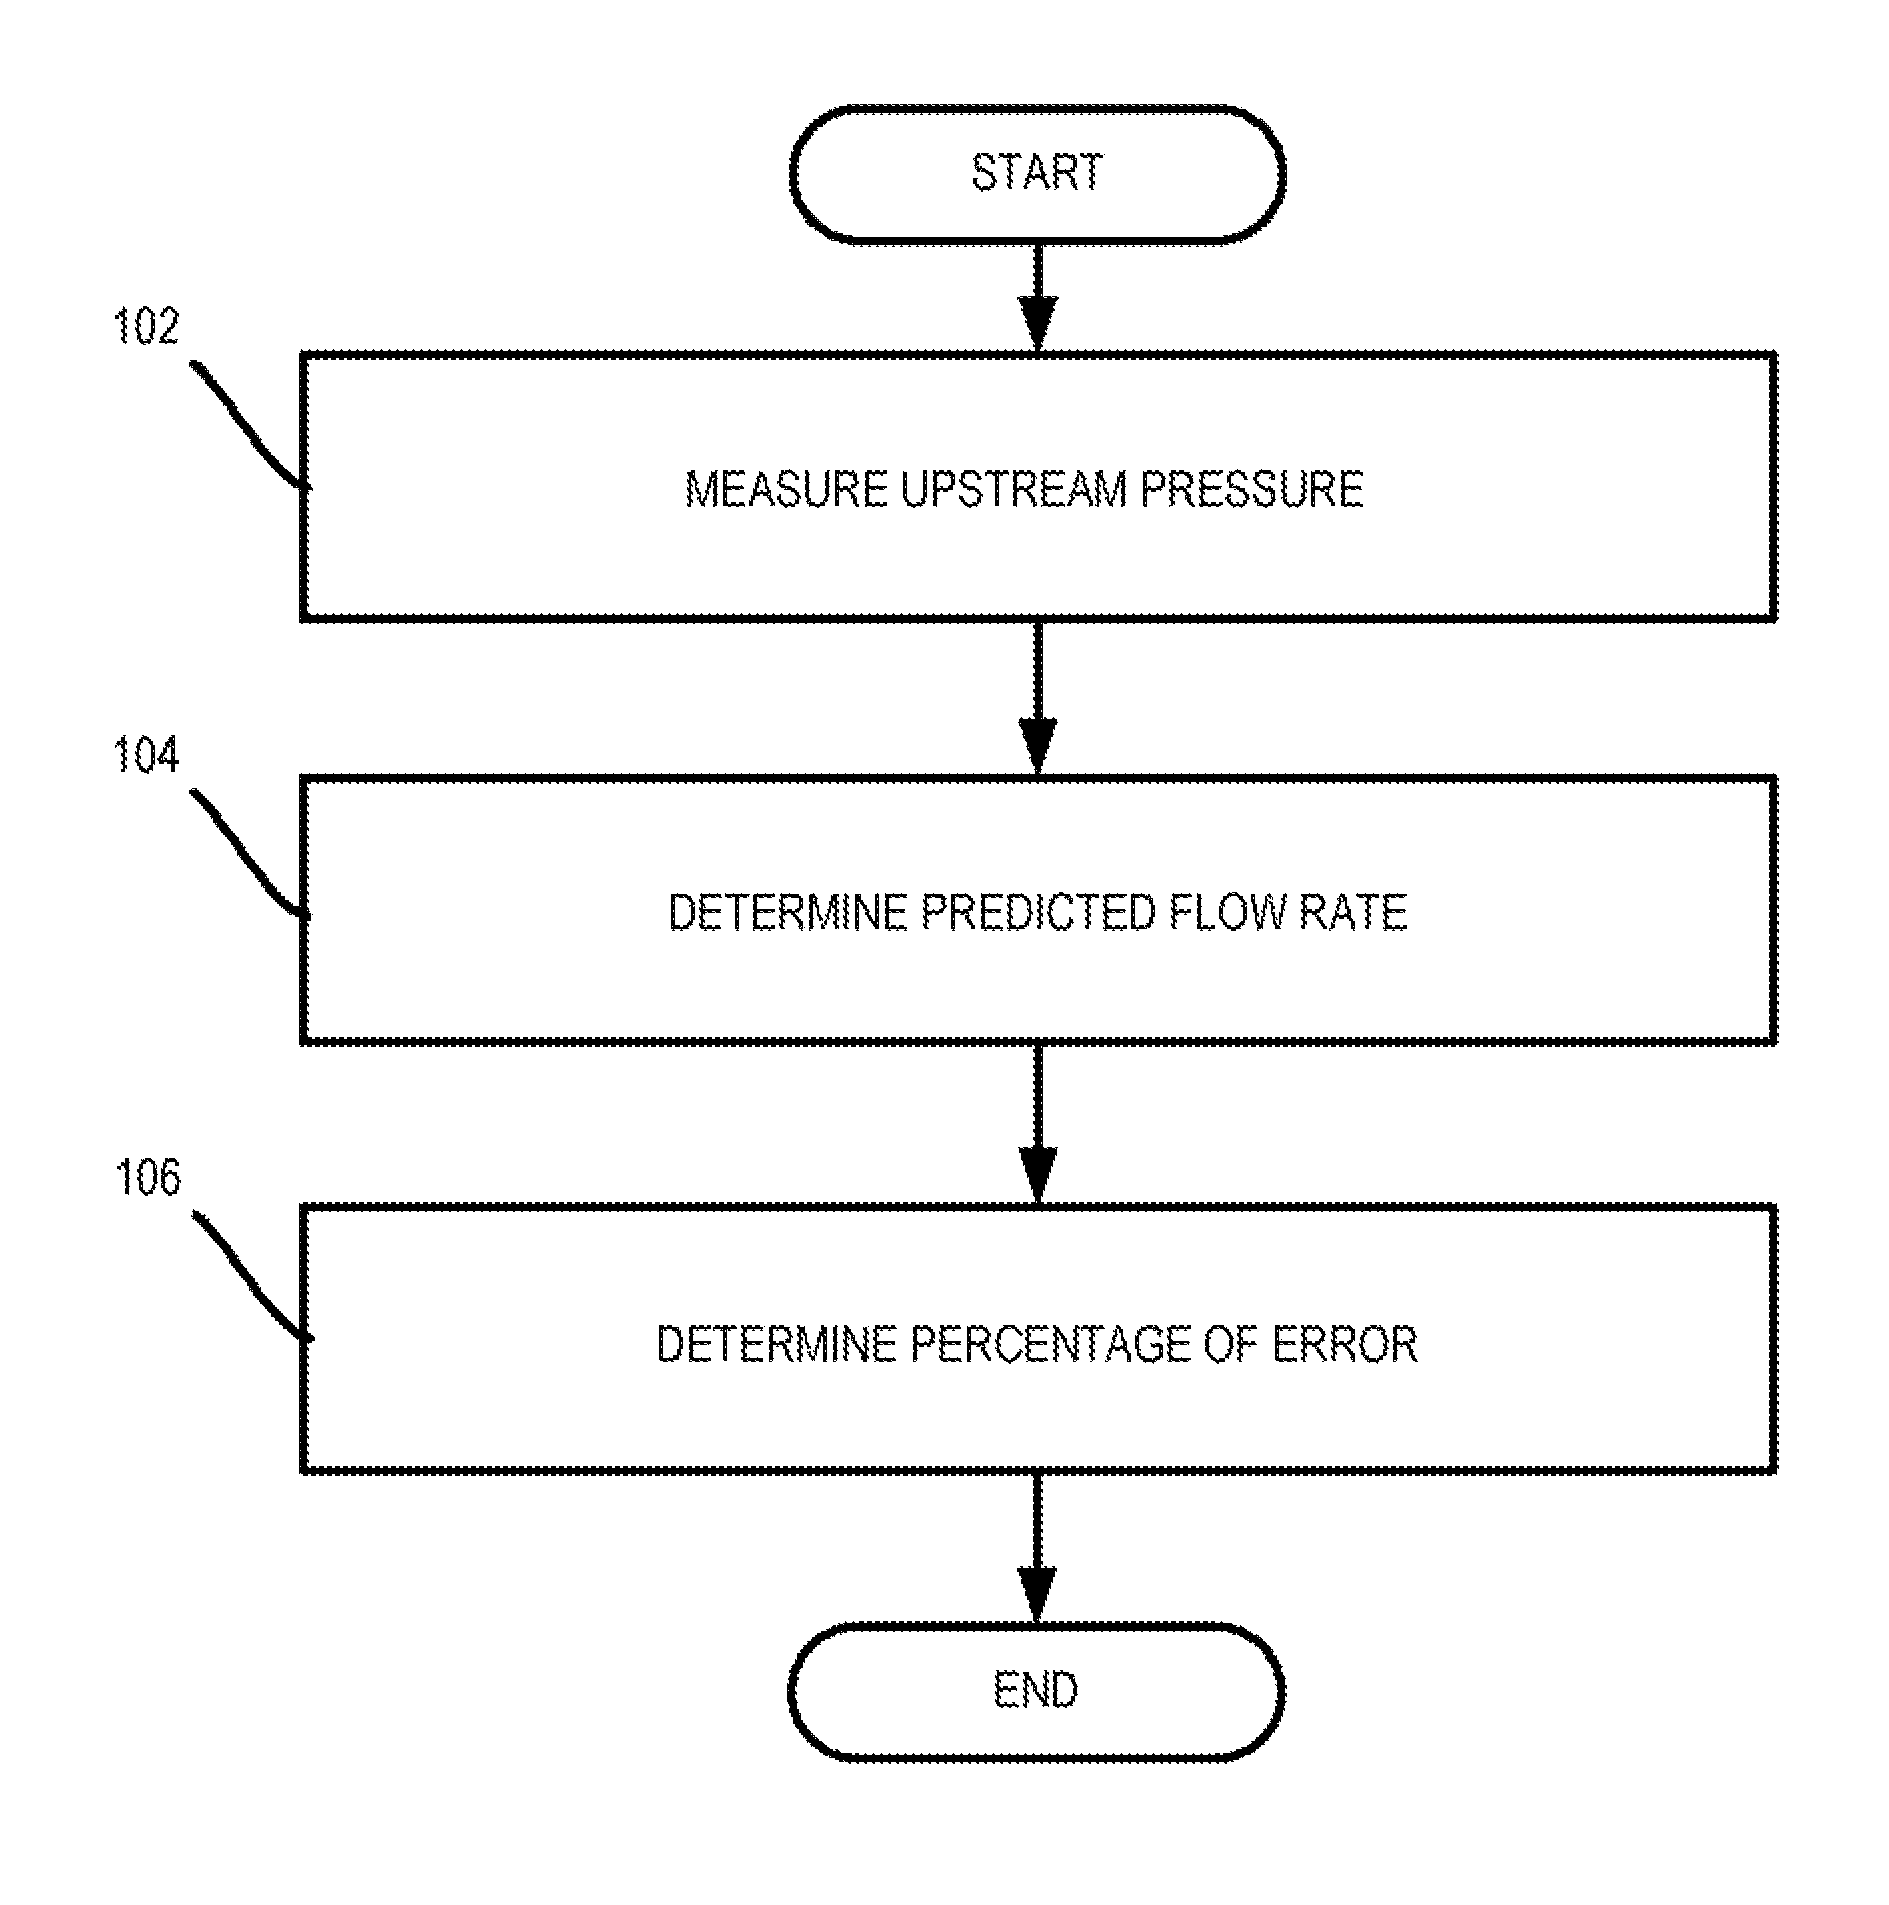 Methods for performing transient flow prediction and verification using discharge coefficients